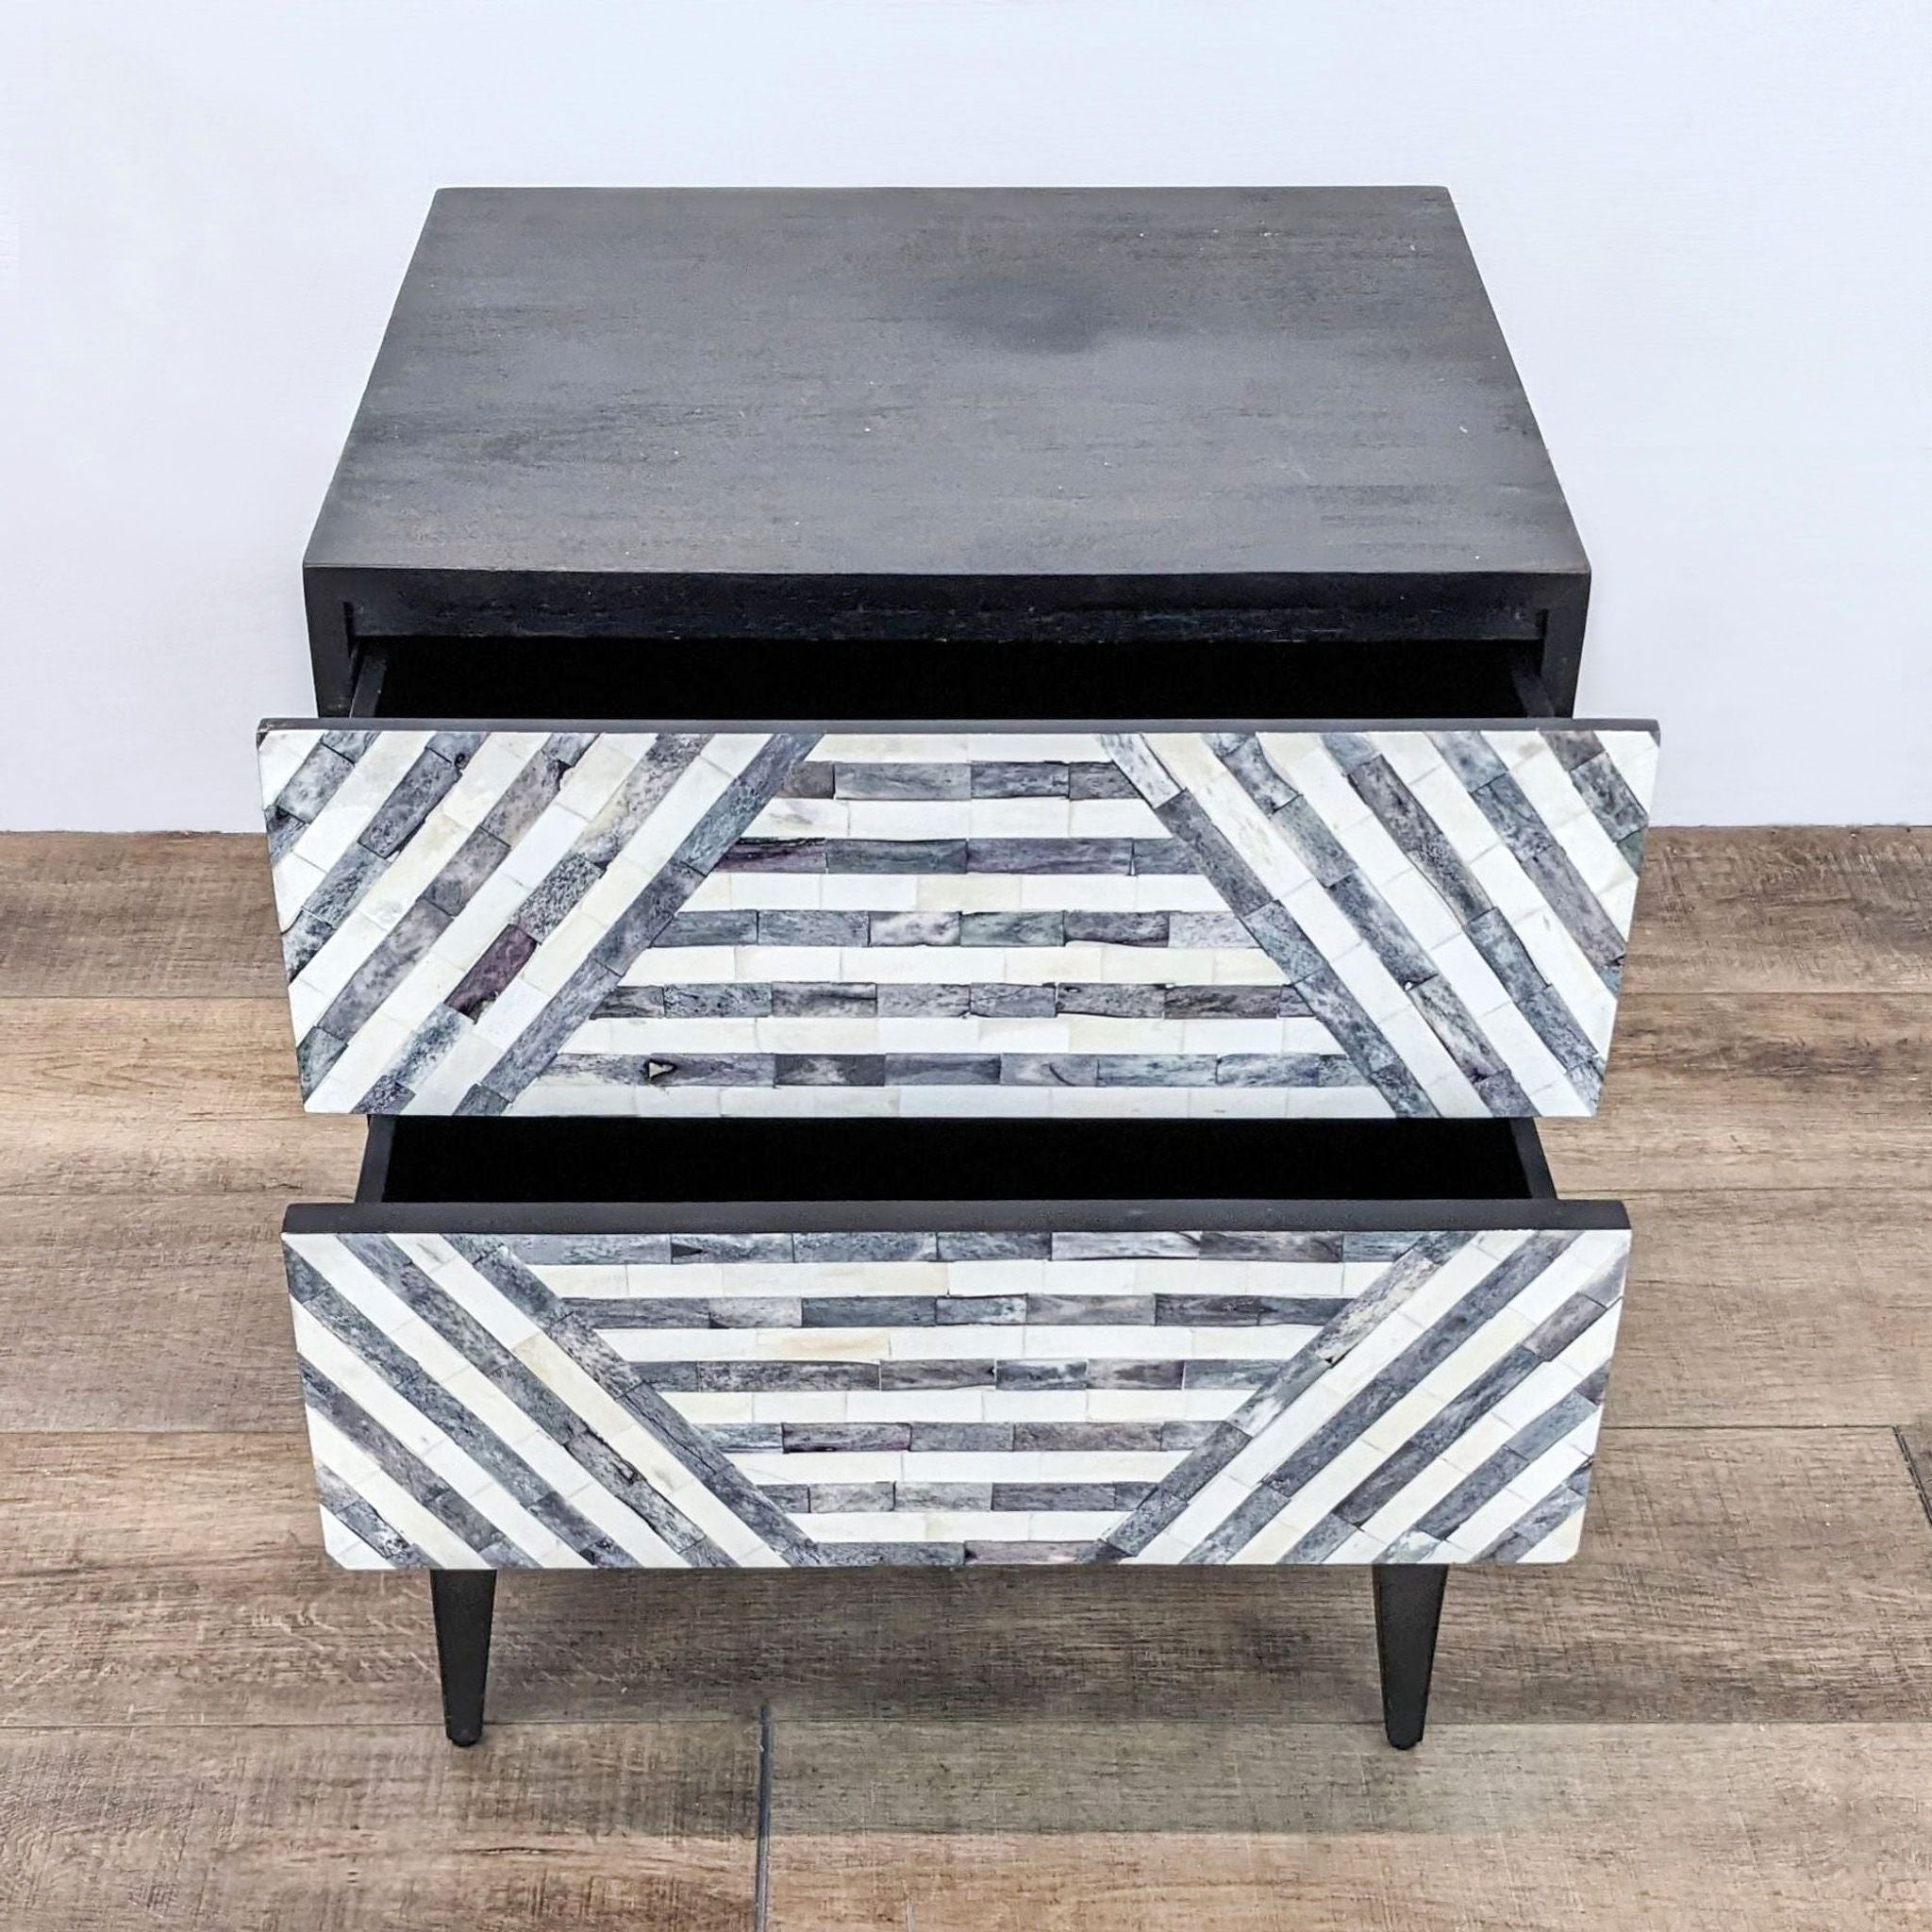 2. Front view of a West Elm end table with herringbone-like striped drawers, on a wooden floor.